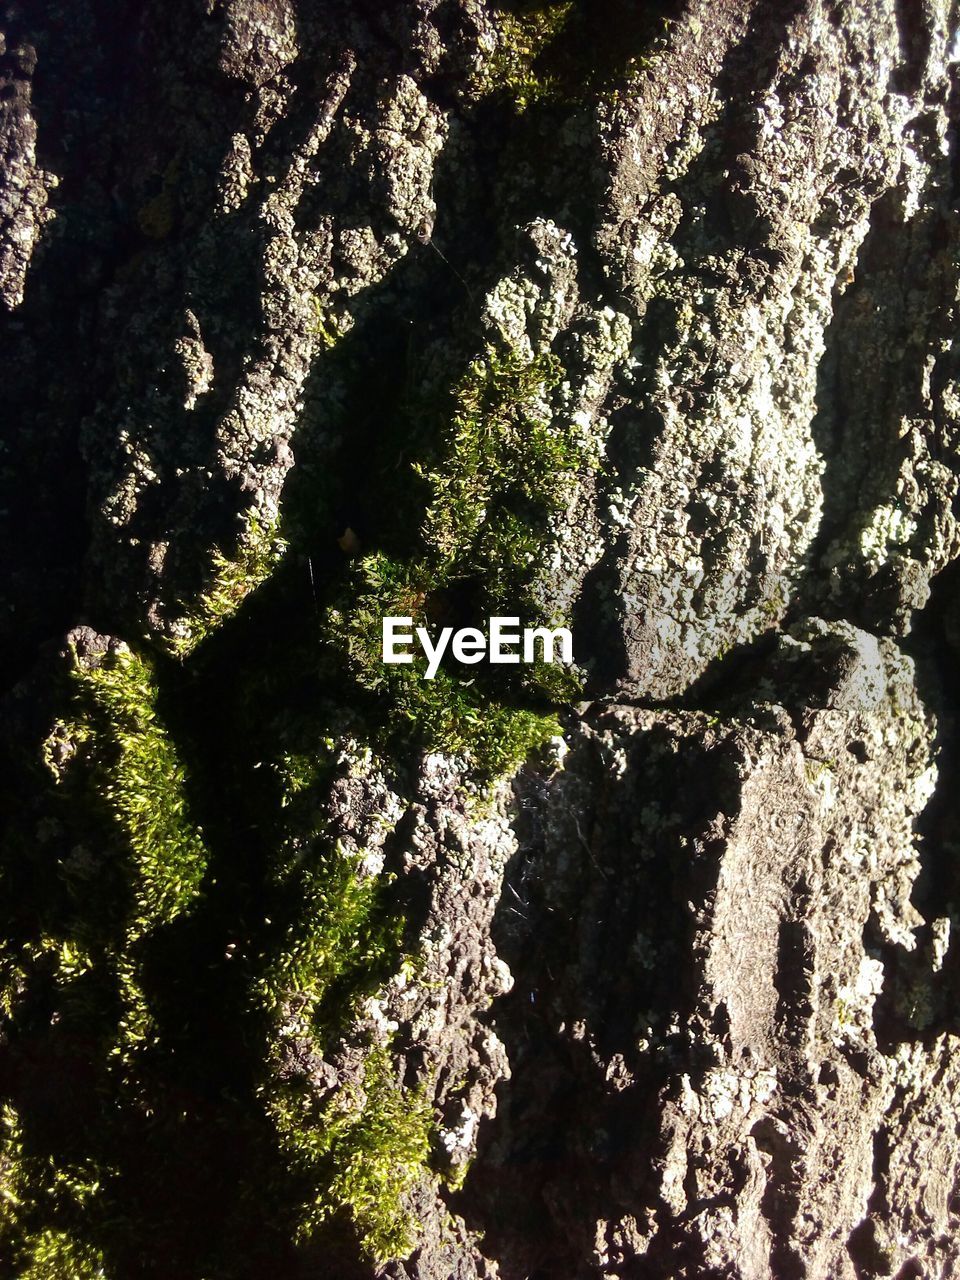 LOW ANGLE VIEW OF MOSS GROWING ON TREE